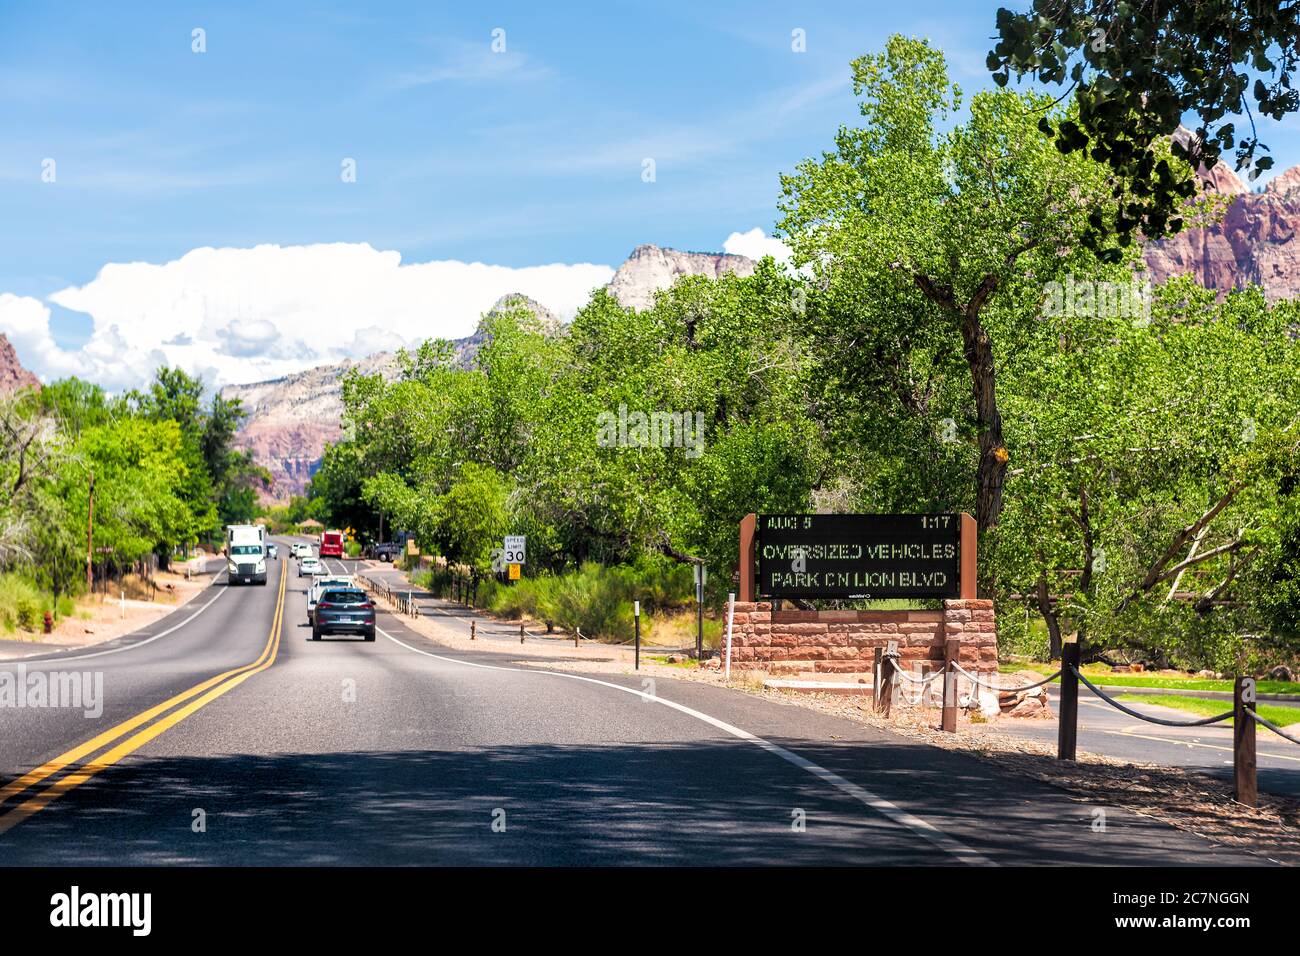 Springdale, USA - August 5, 2019: Zion National Park entrance sign and traffic with parking information on road in Utah and cars in road point of view Stock Photo